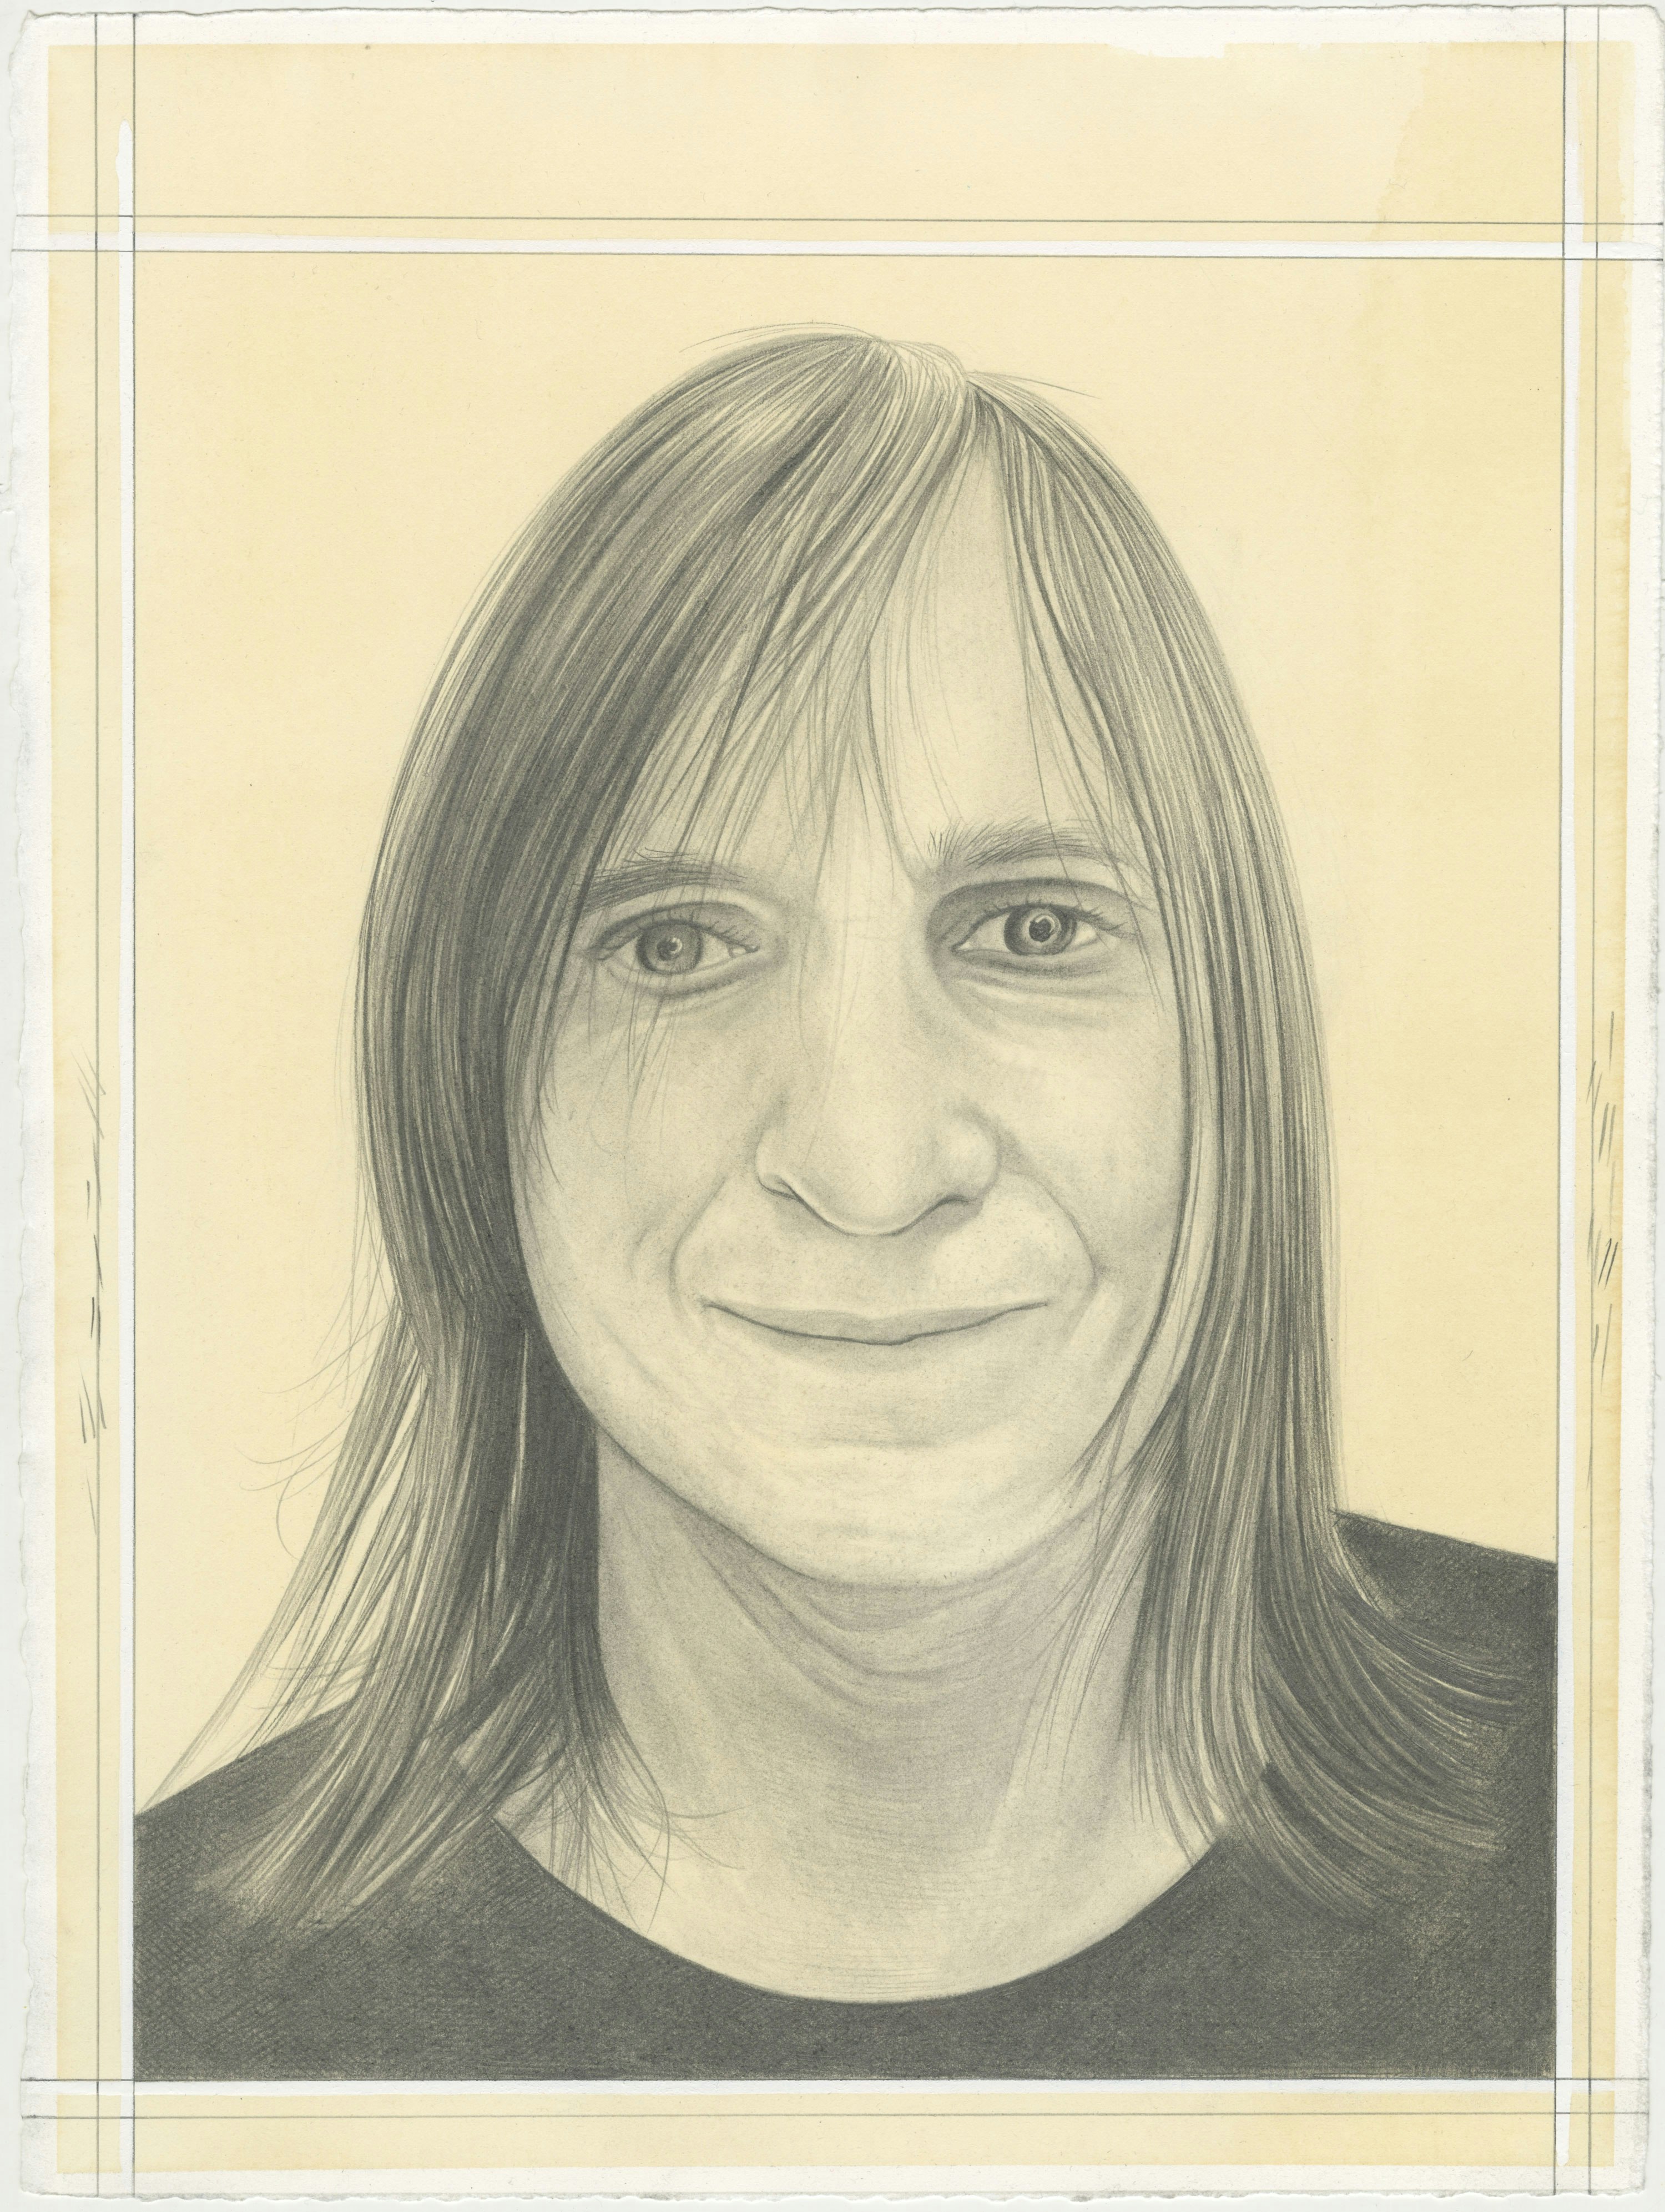 Portrait of McKenzie Wark, pencil on paper by Phong H. Bui